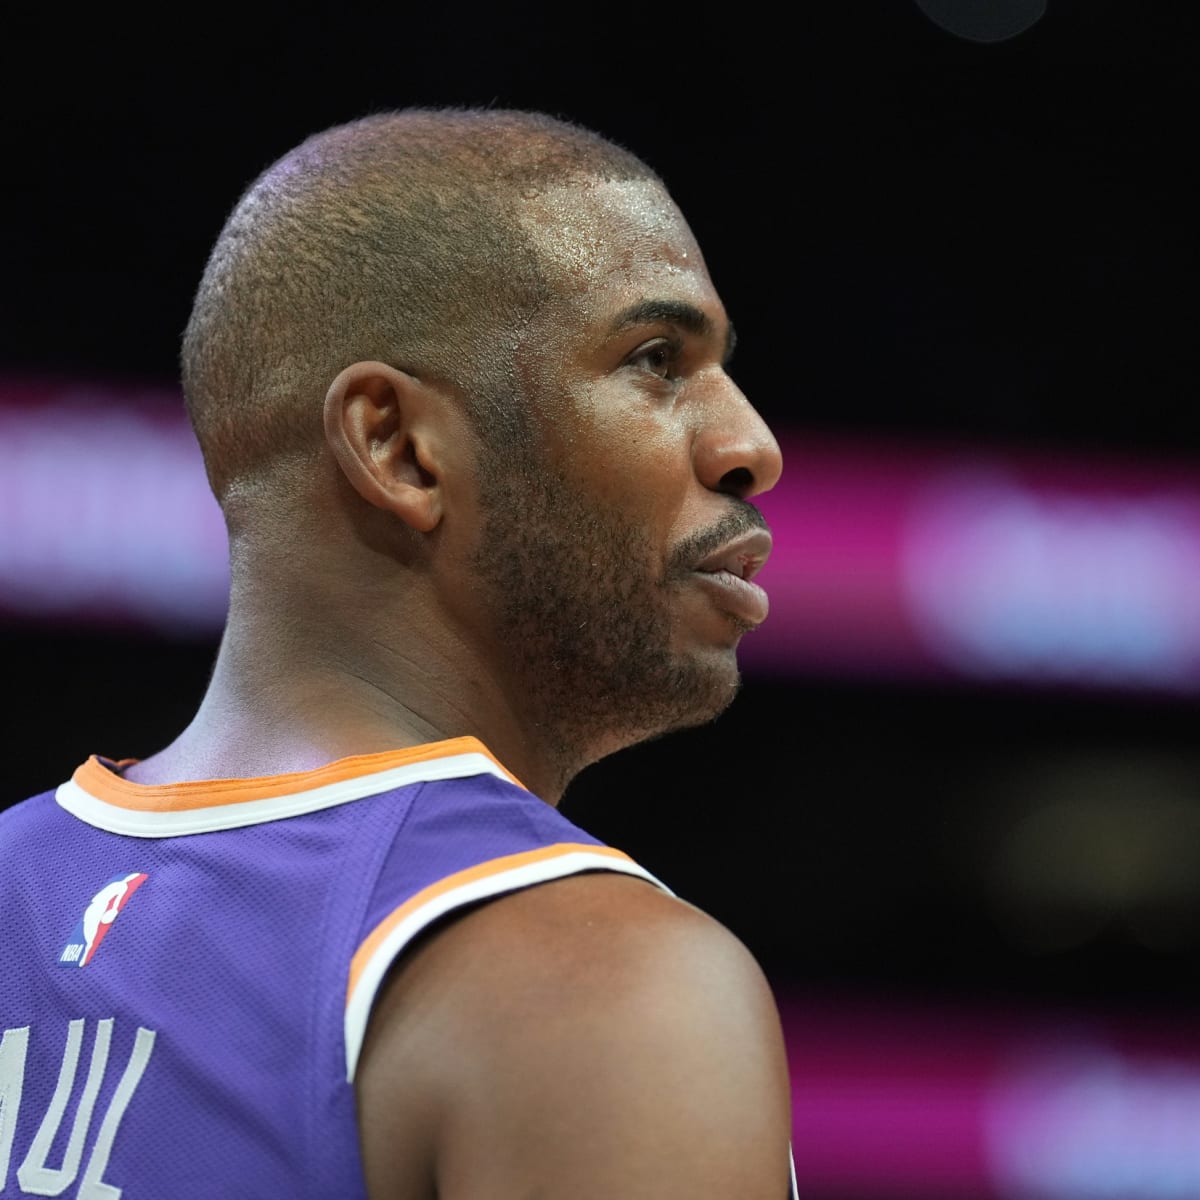 Chris Paul reveals what he's most 'excited' about after trade to Warriors